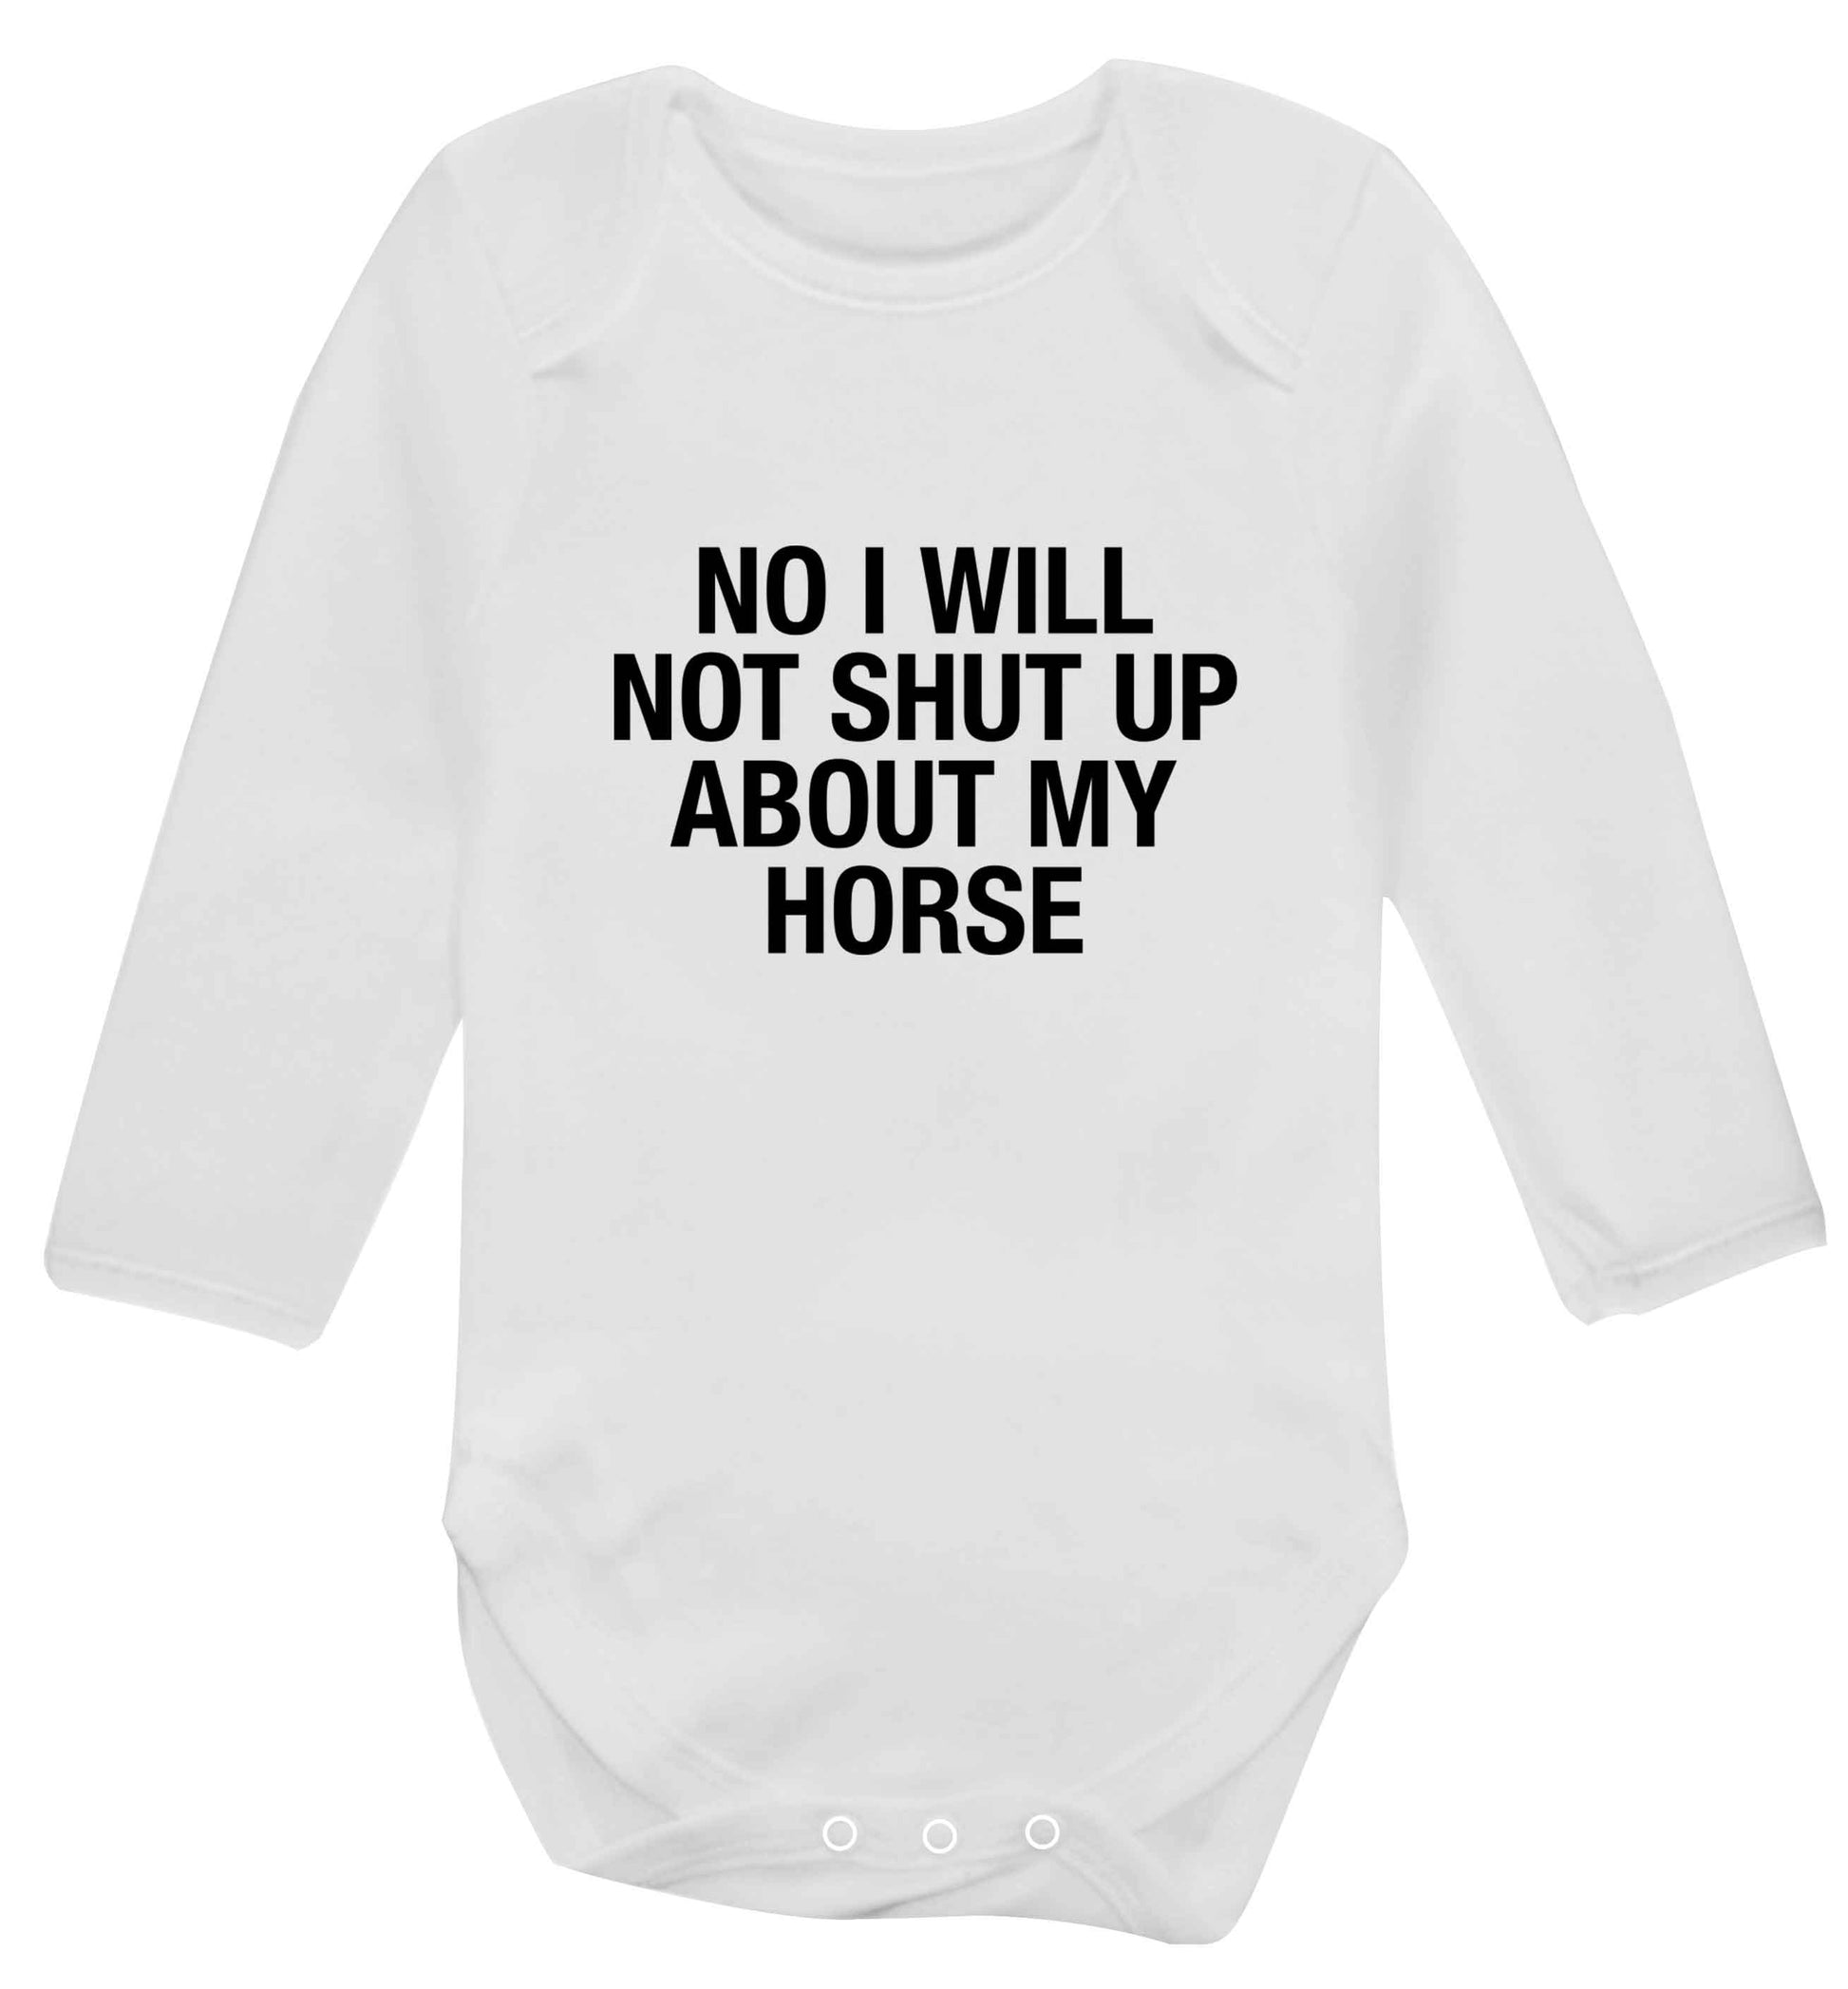 No I will not shut up talking about my horse baby vest long sleeved white 6-12 months